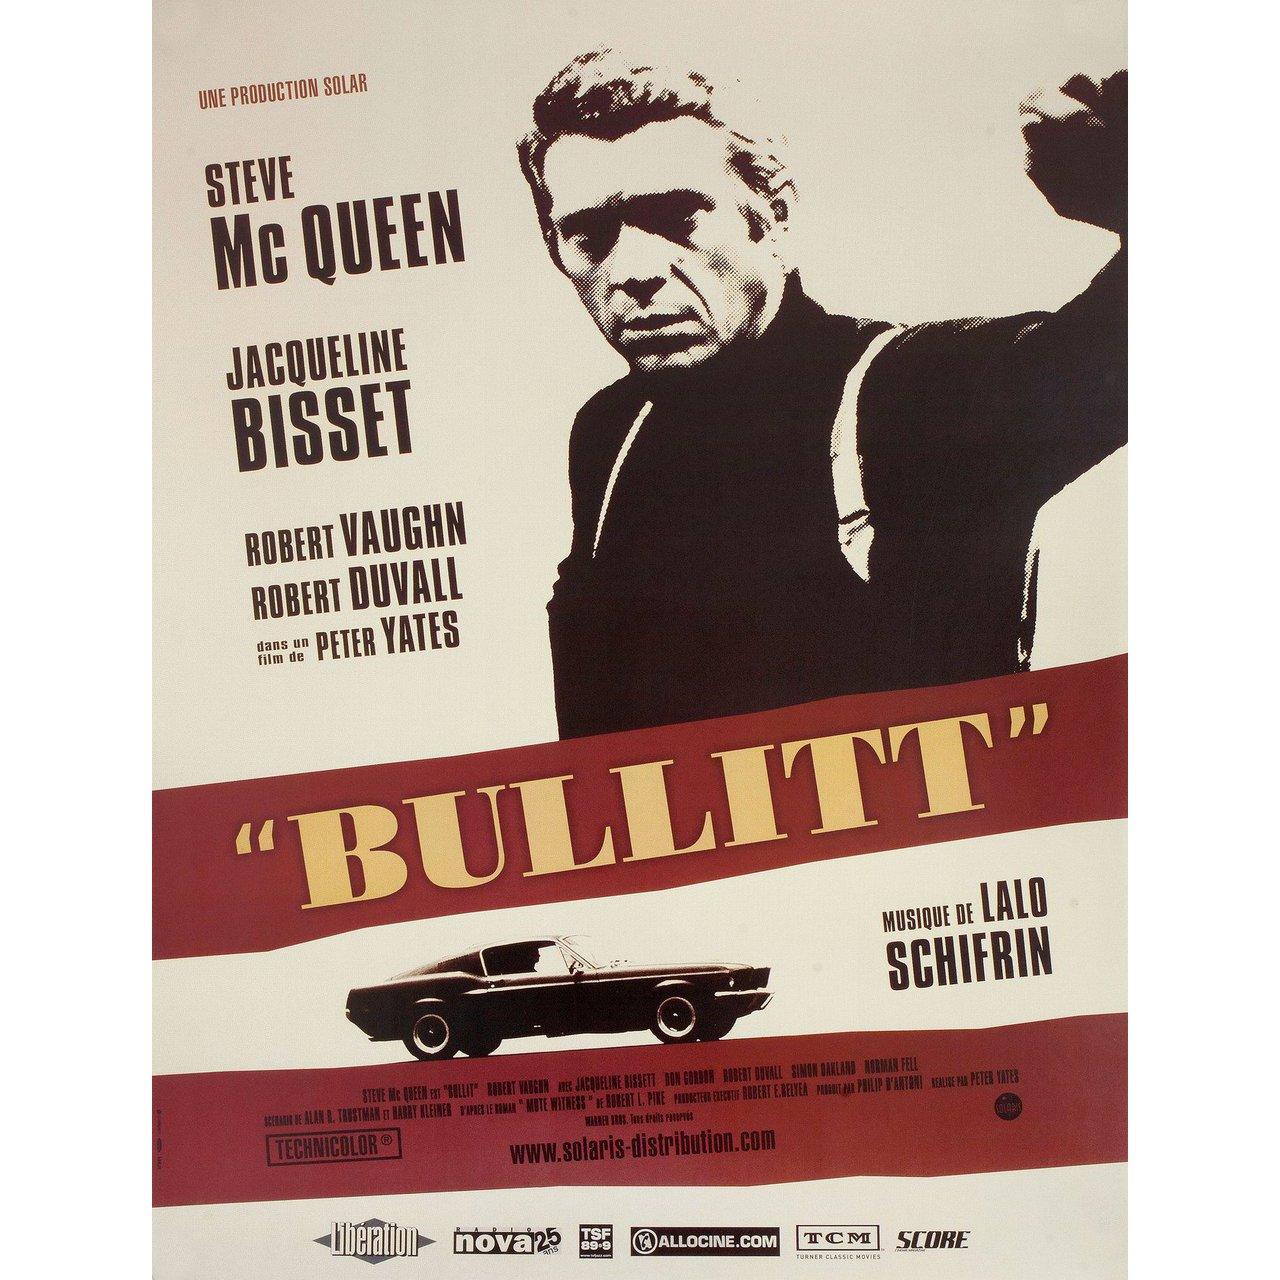 Original 2006 re-release French petite poster for the 1968 film ‘Bullitt’ directed by Peter Yates with Steve McQueen / Jacqueline Bisset / Robert Vaughn / Don Gordon. Fine condition, rolled. Please note: the size is stated in inches and the actual